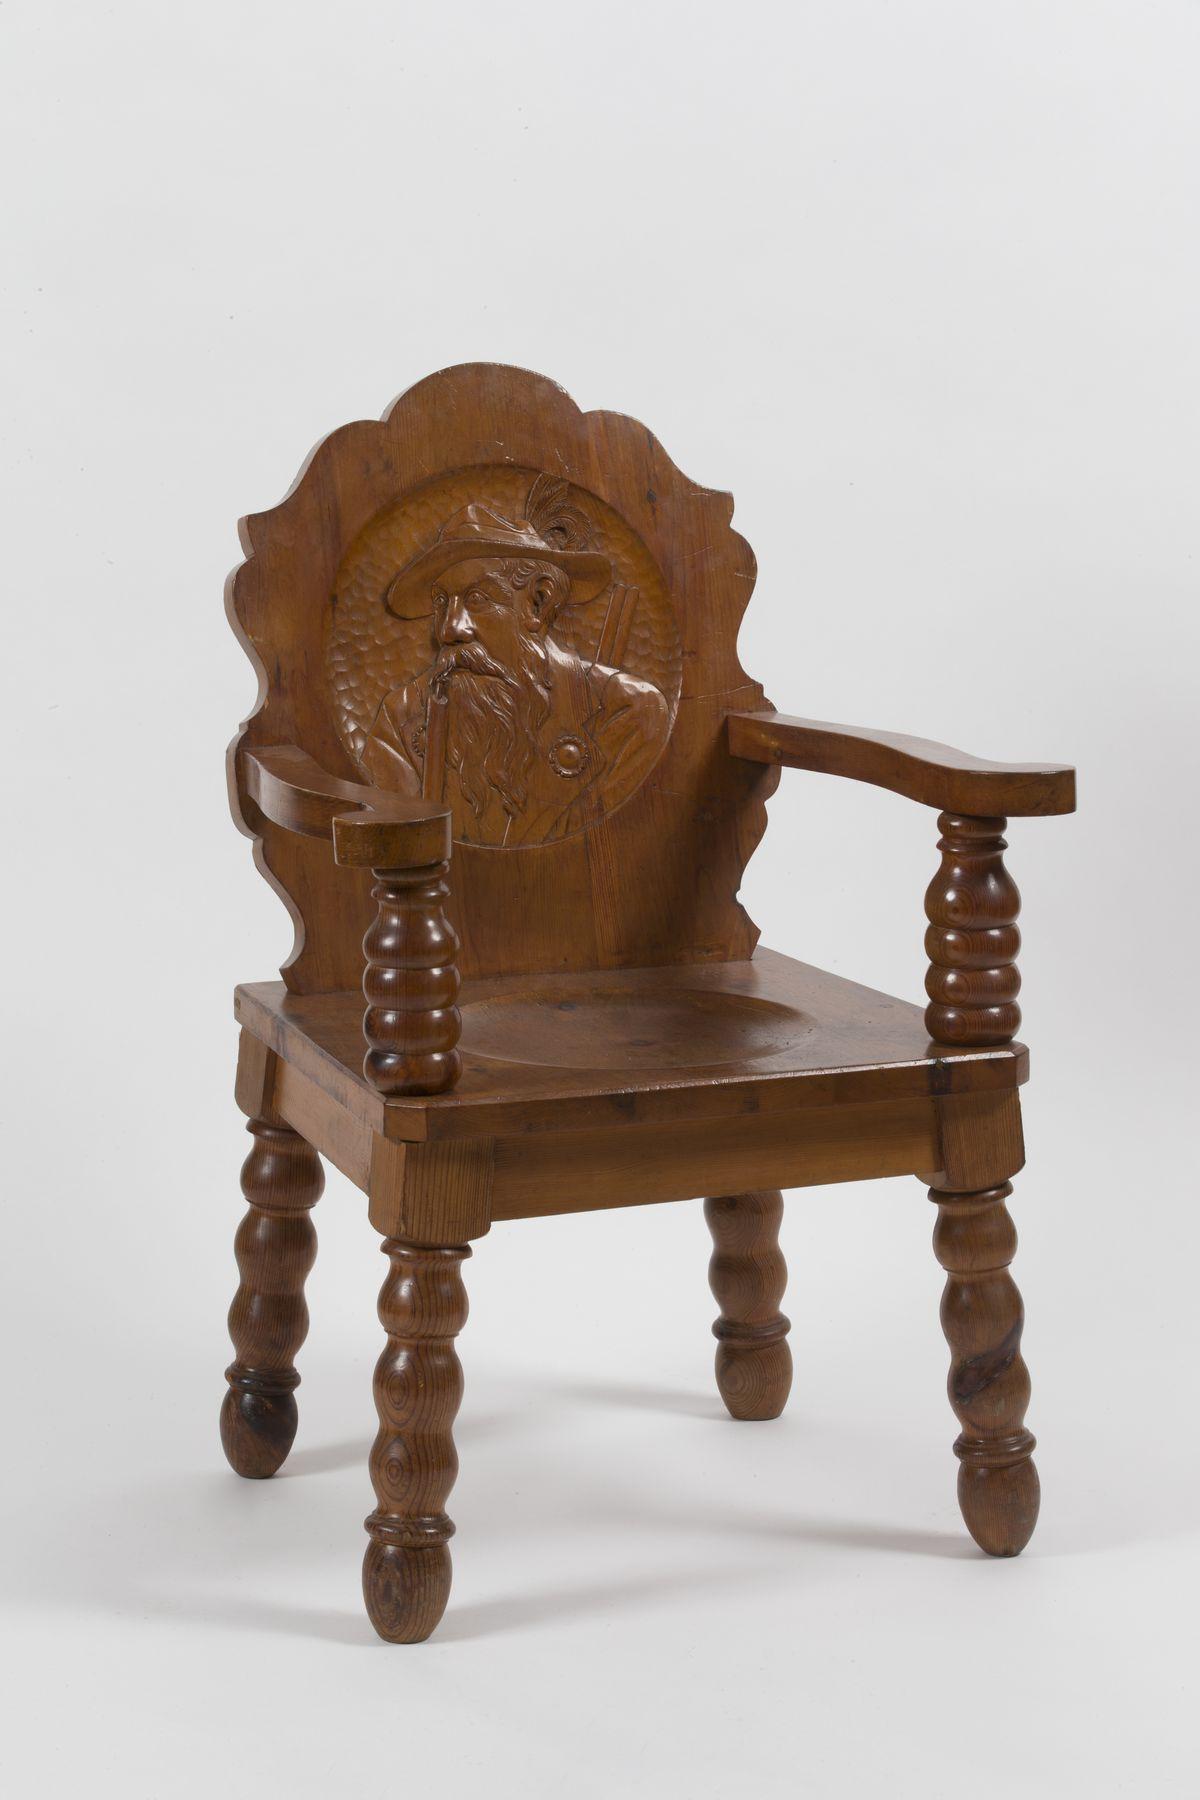 Set of Medallion chairs and armchairs
Austrian work
First half of the 20th century
Carved oak

This set of oak wood seats is composed of two chairs and two armchairs with carved medallions on the backrests. Medallions work in pairs. These are